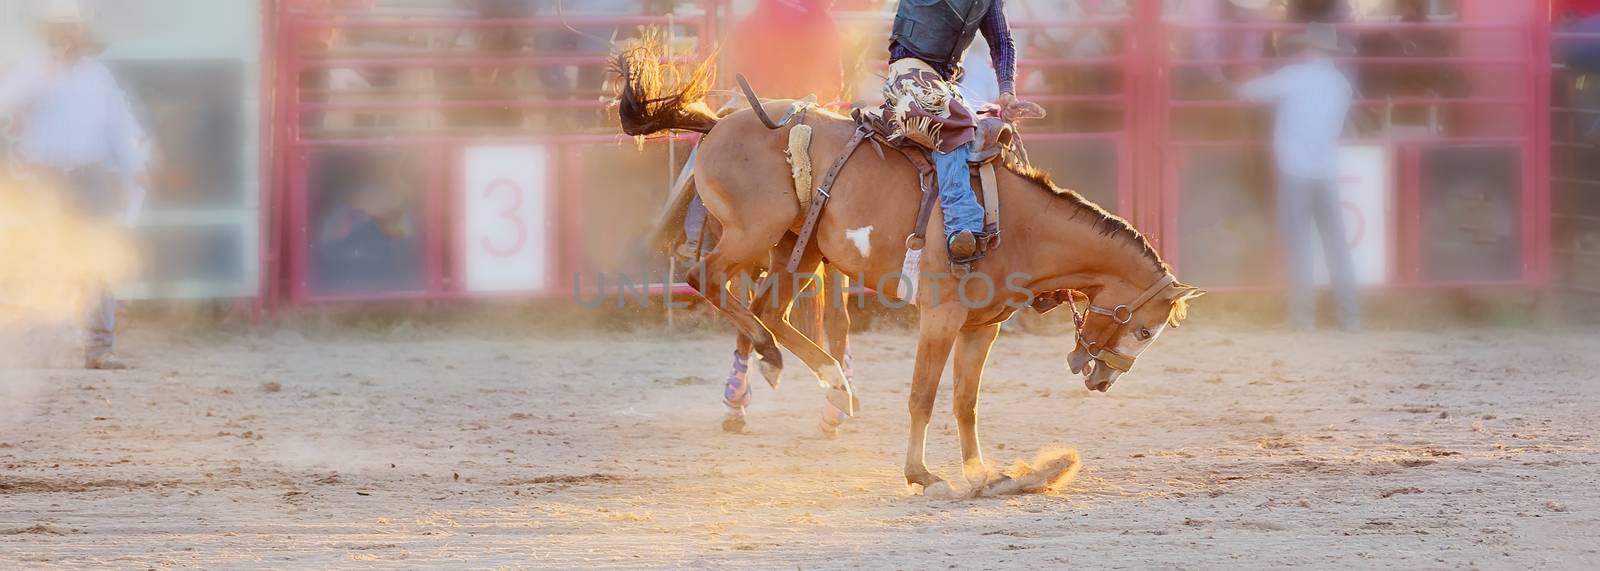 Bucking Horse Riding Rodeo Competition by 	JacksonStock